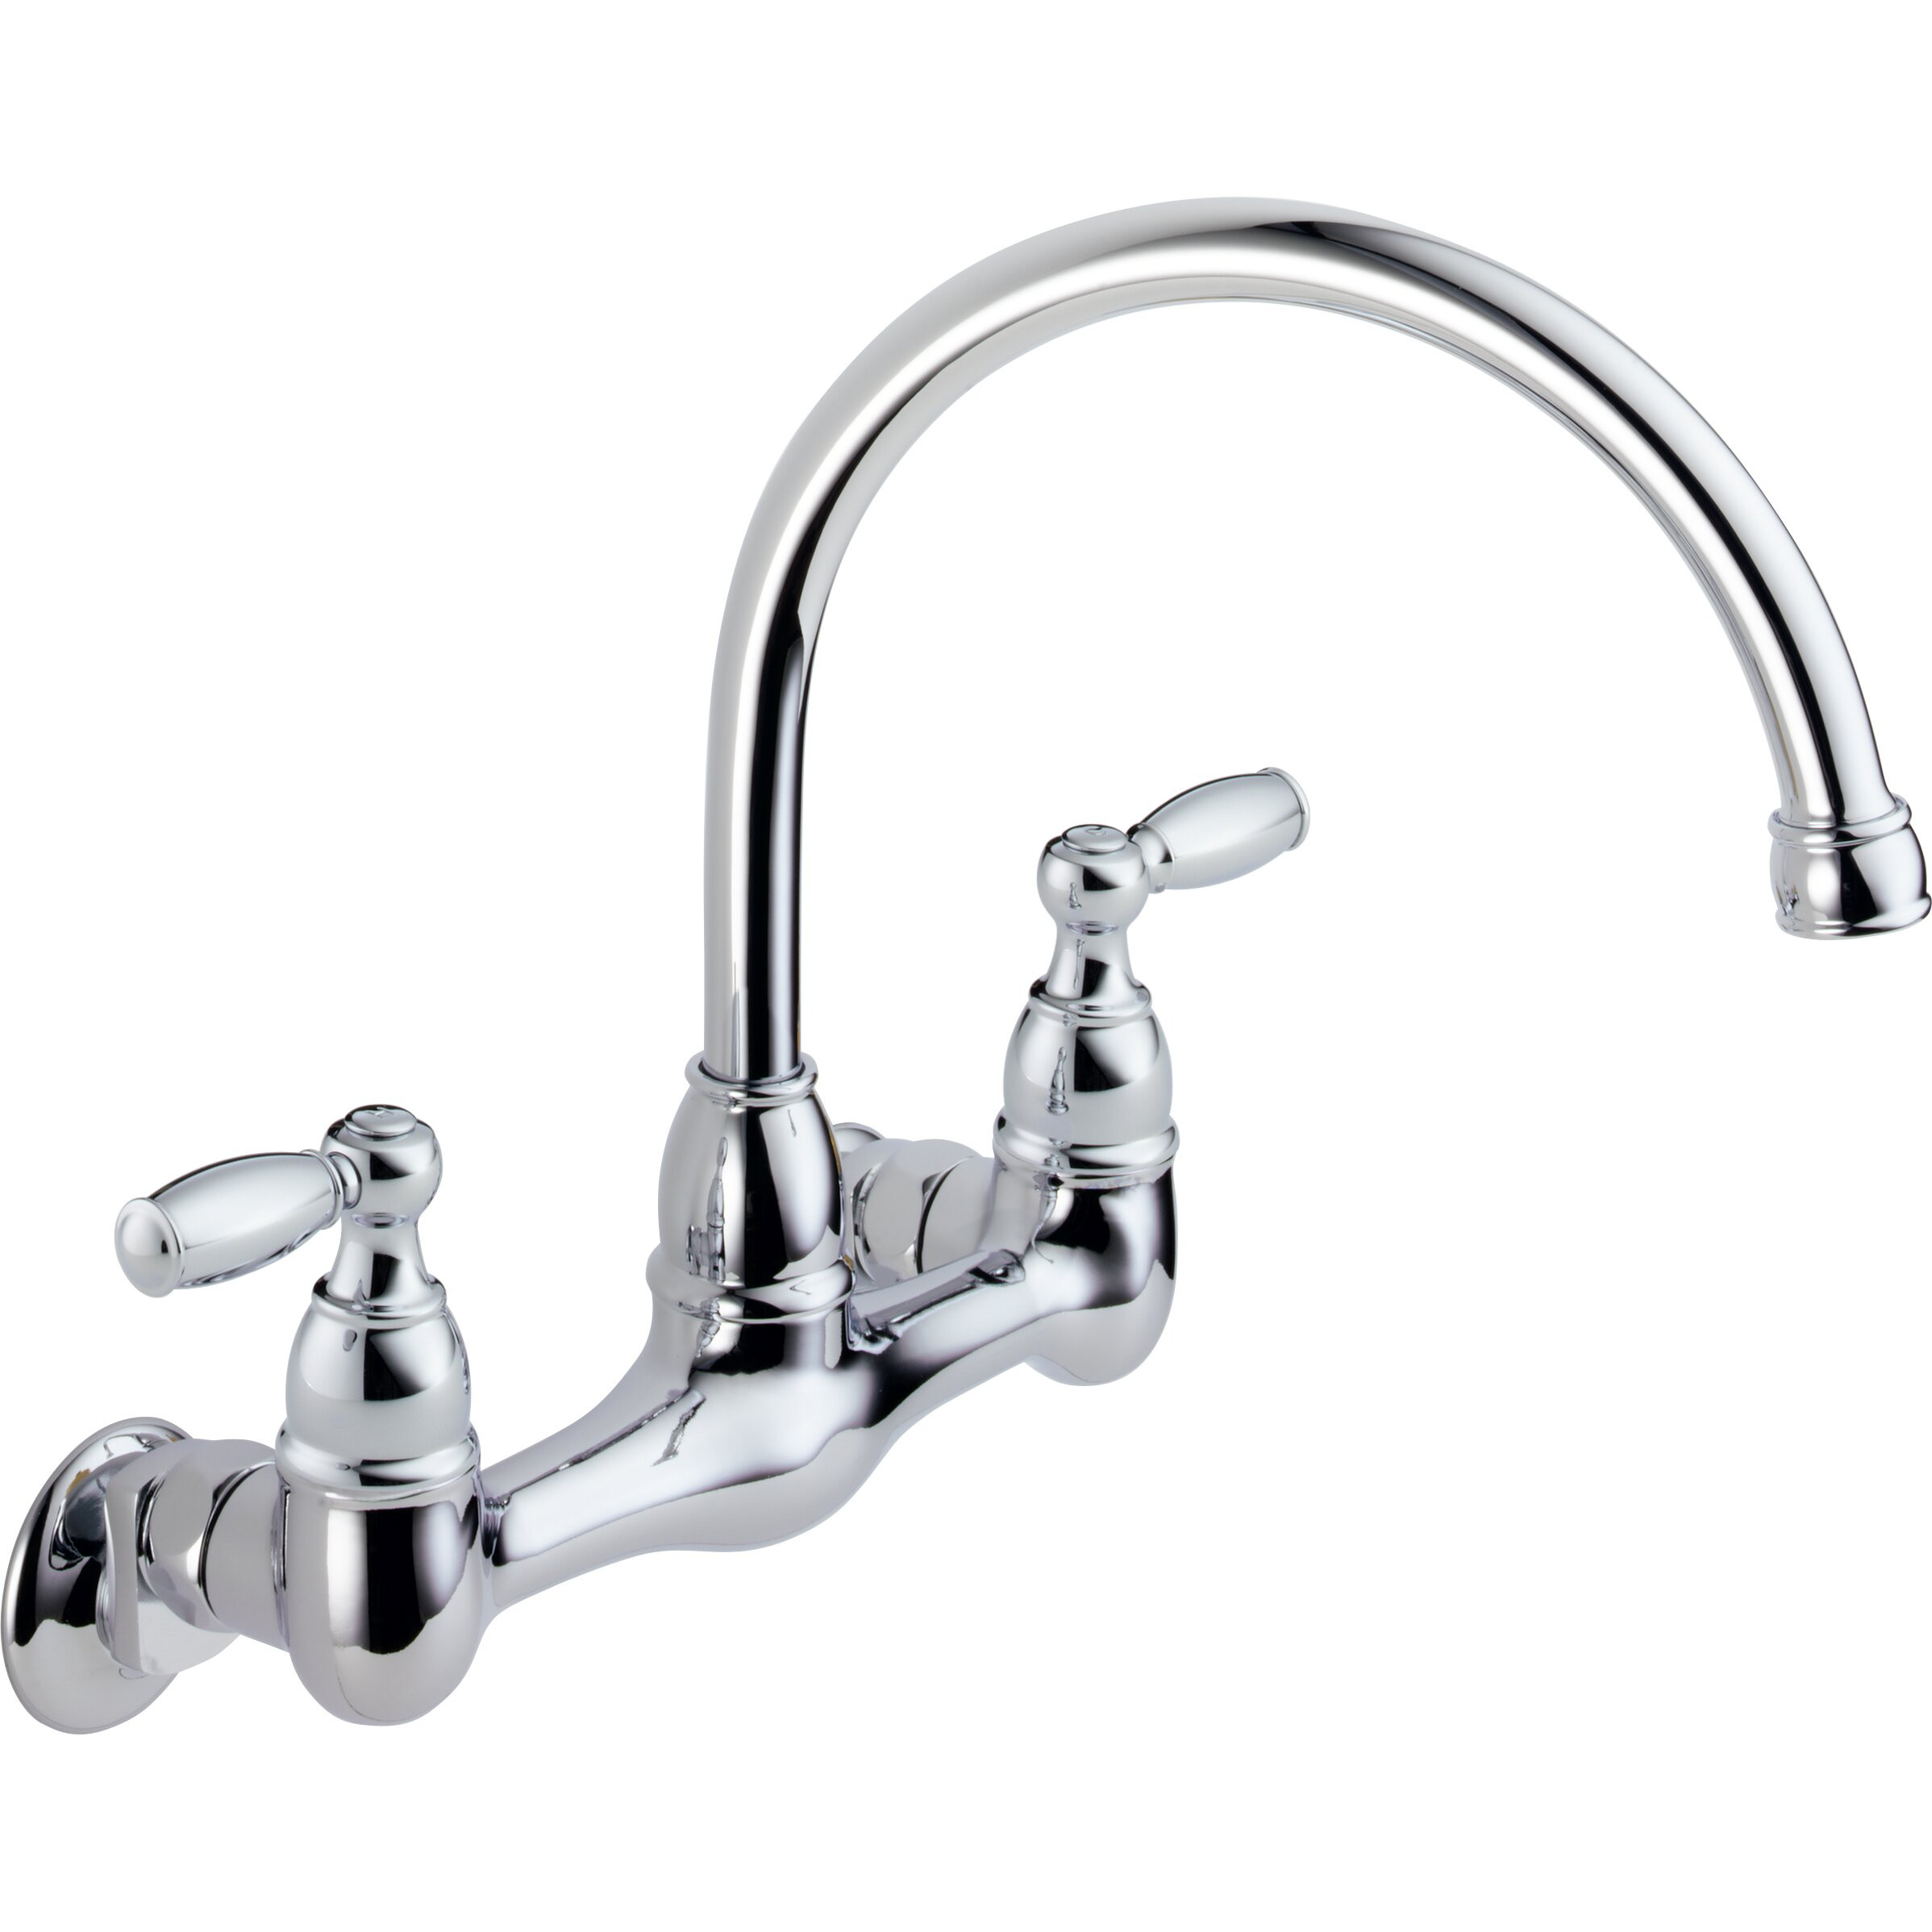 Kitchen Wall Mounted Faucets
 Peerless Faucets Two Handle Wall Mounted Kitchen Faucet